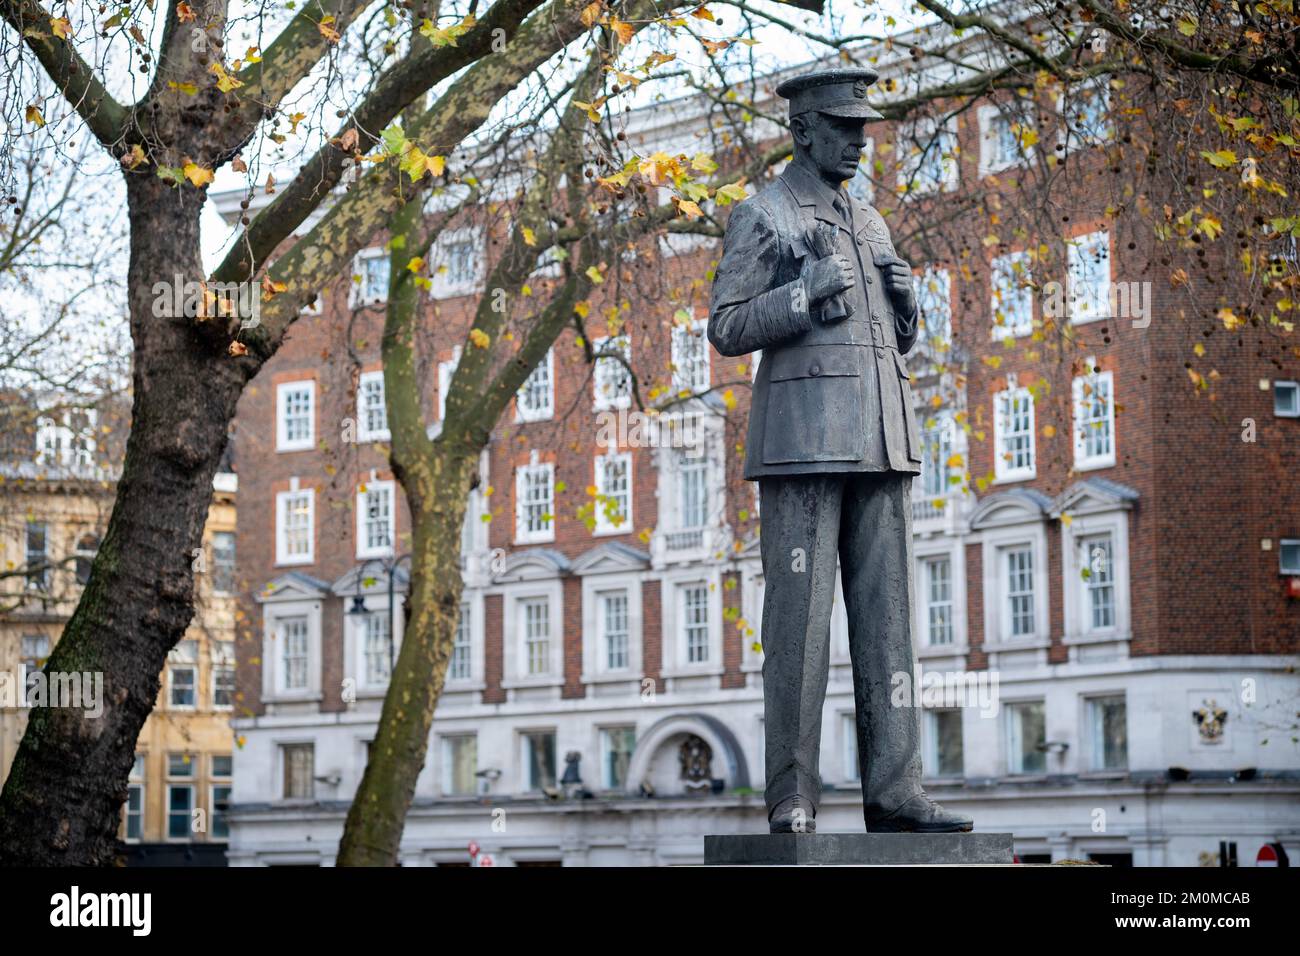 Statue of Air Chief Marshal Hugh Dowding outside St Clement Danes church in London. Fighter Command chief in WW2 Stock Photo